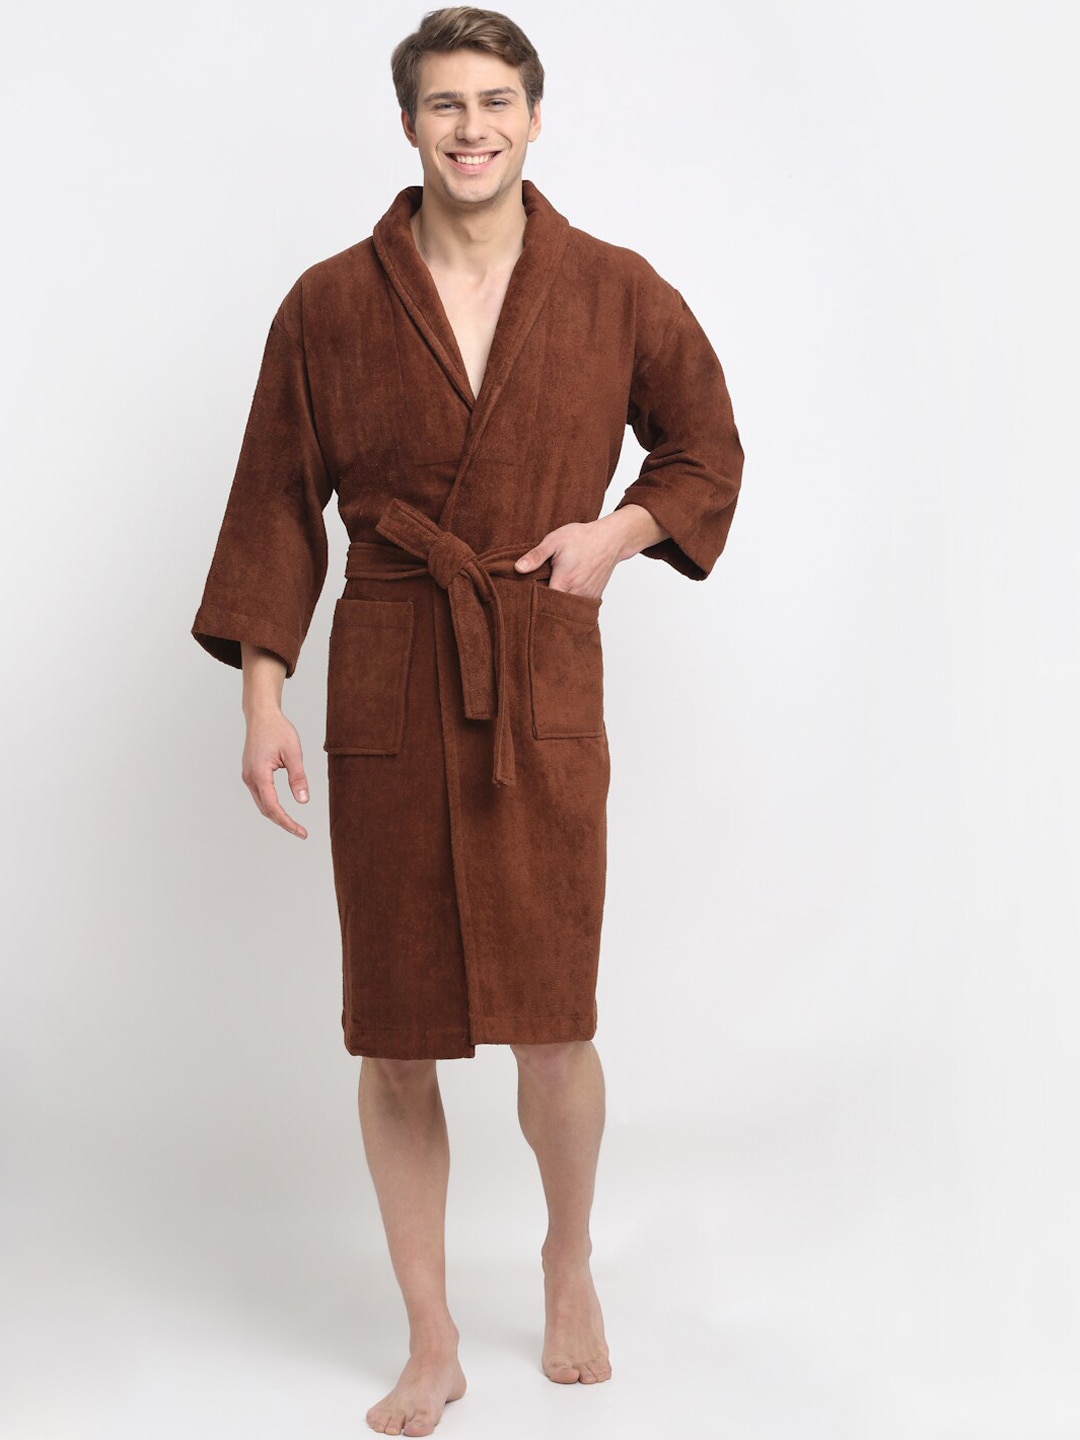 Creeva Unisex Brown Solid Bath Robe With Pockets Price in India